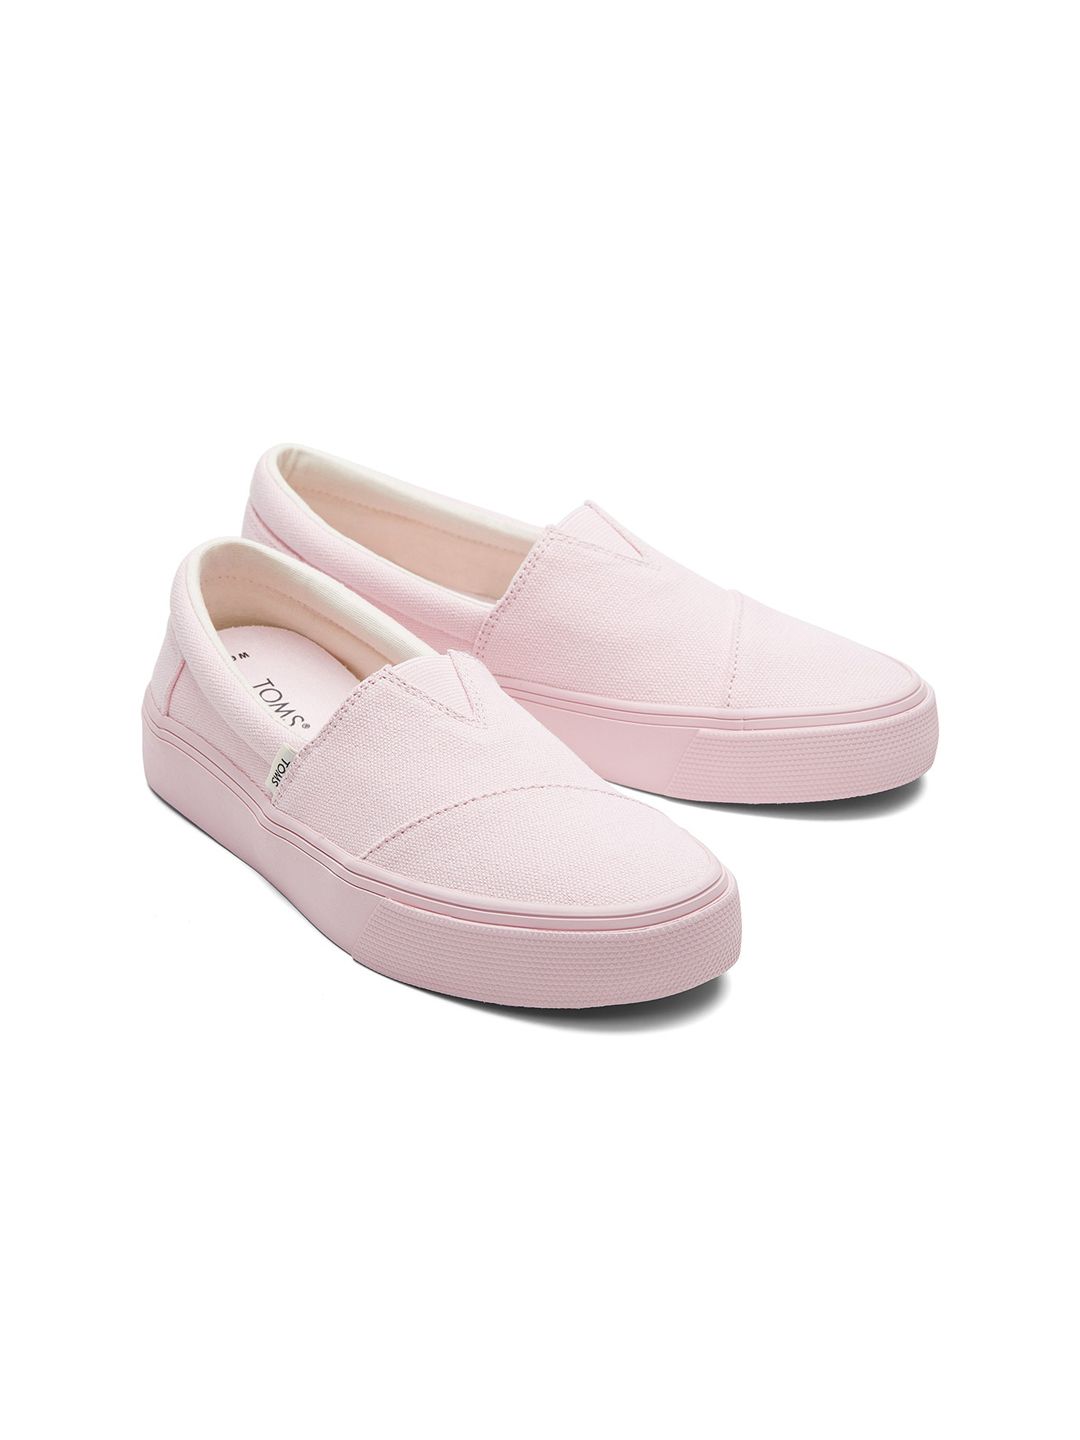 TOMS Women Pink Washed Canvas Alpargata Slip-On Sneakers Price in India